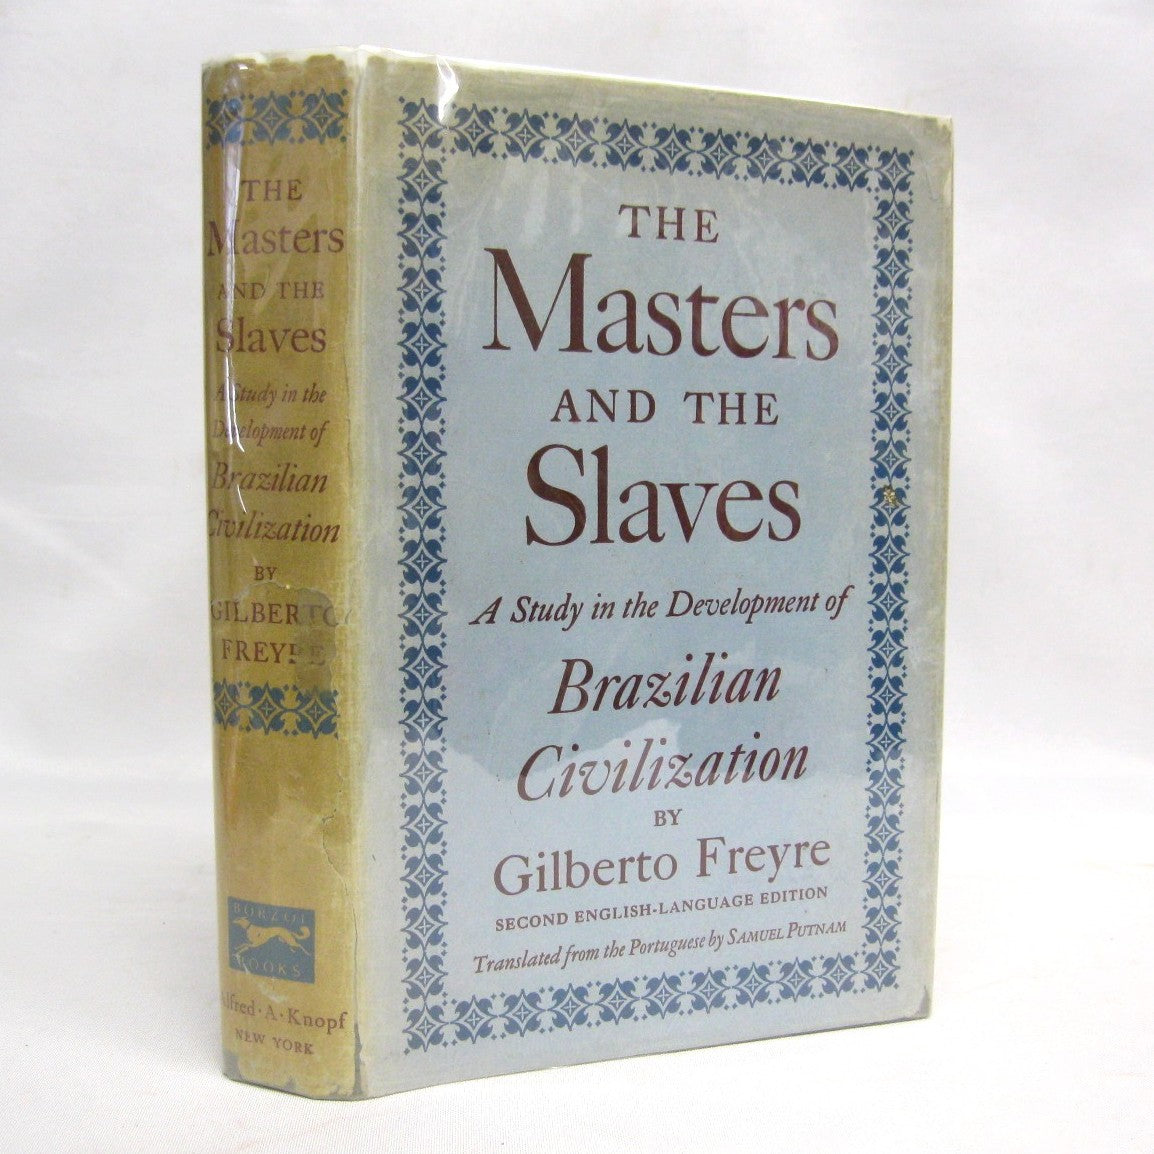 The Masters and the Slaves: a study of the development of Brazilian civilization by Gilberto Freyre